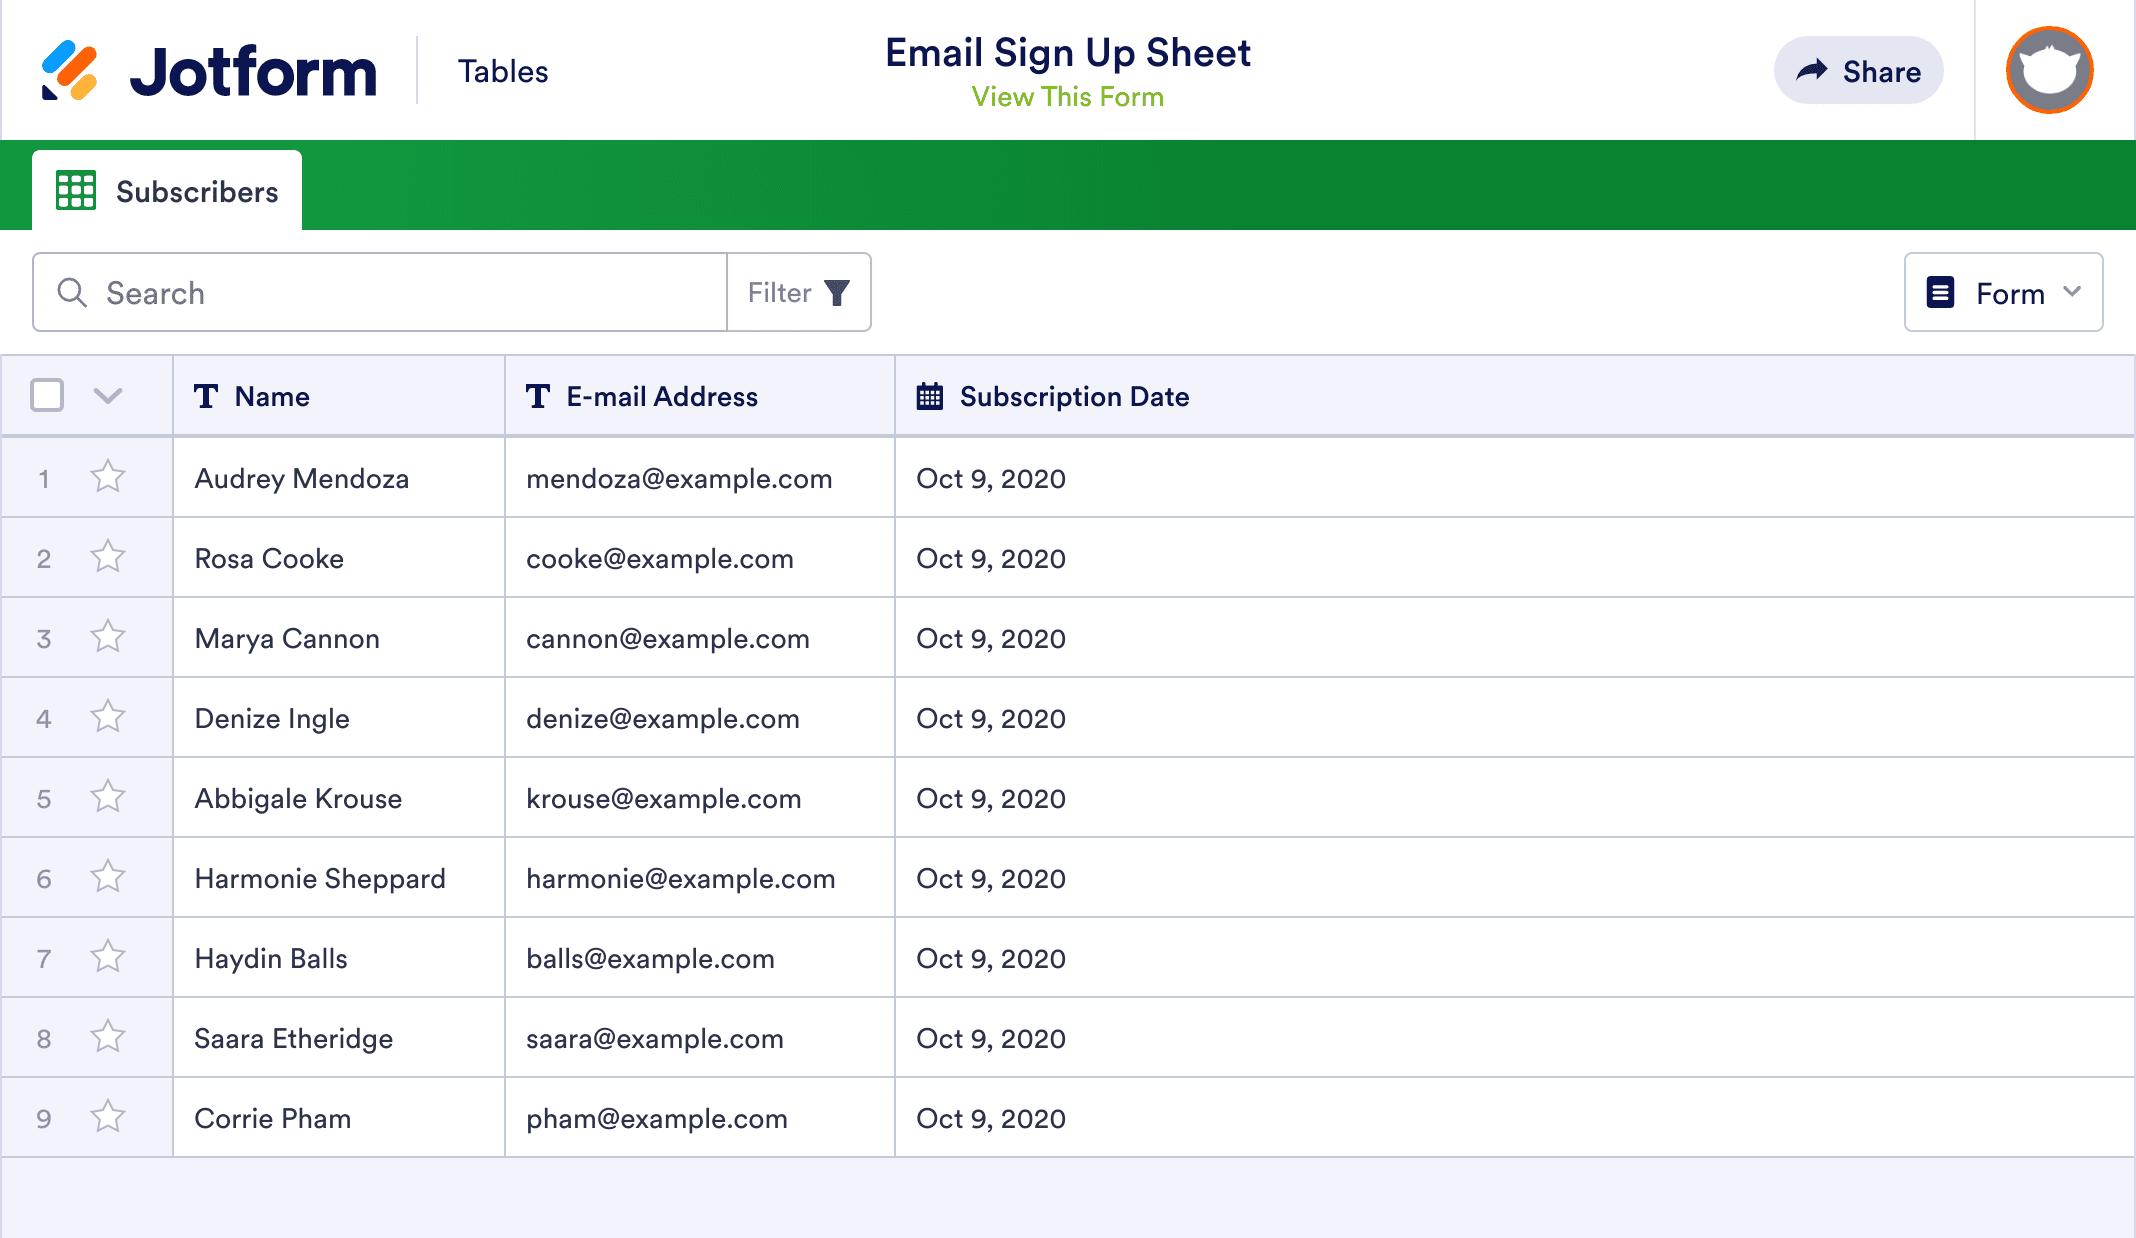 Email Sign Up Sheet